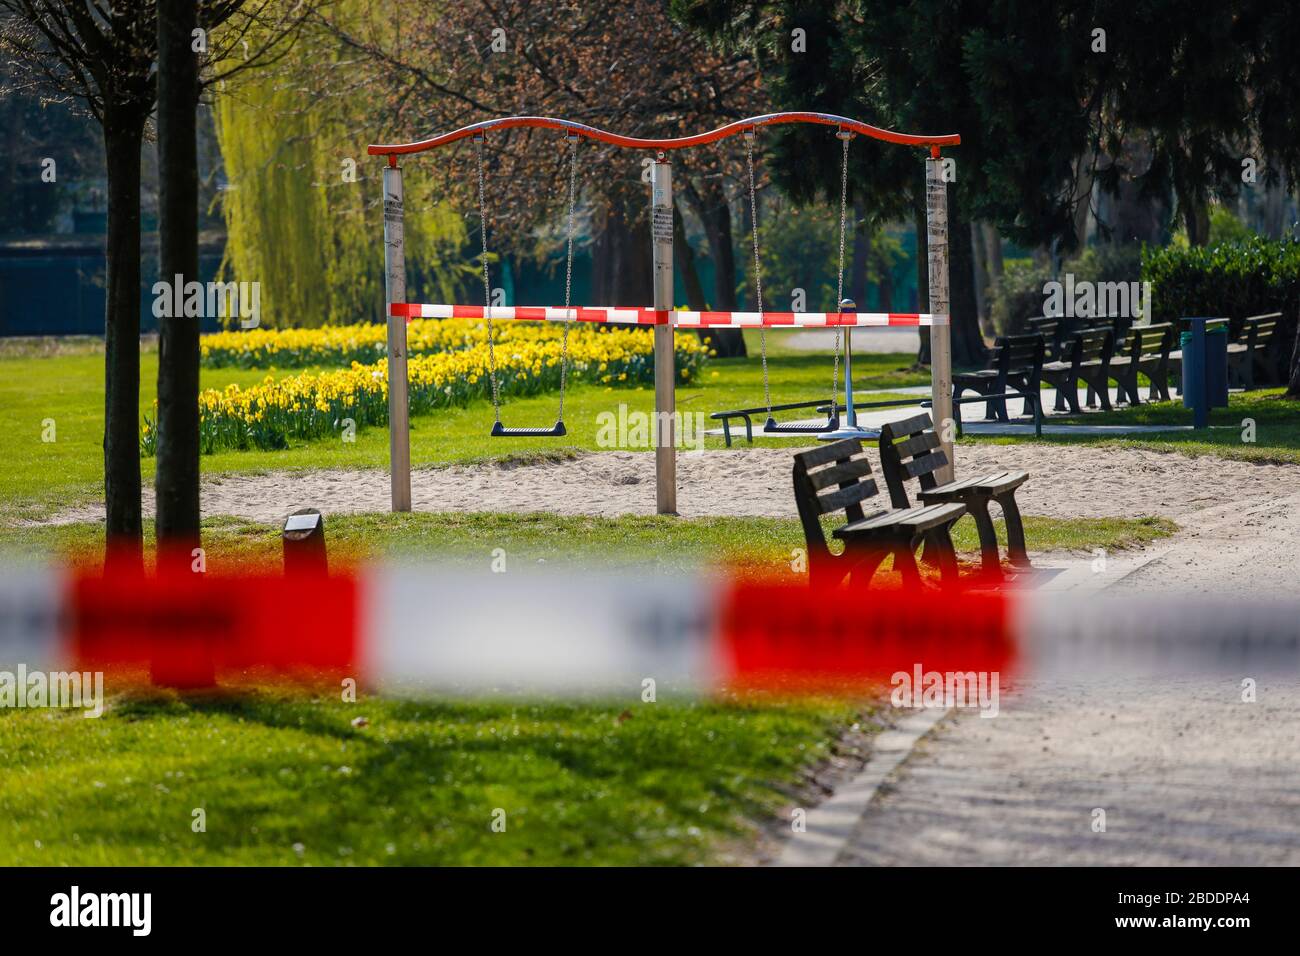 27.03.2020, Essen, North Rhine-Westphalia, Germany - Contact ban due to Corona pandemic, the park at Haumannplatz was closed because too many citizens Stock Photo